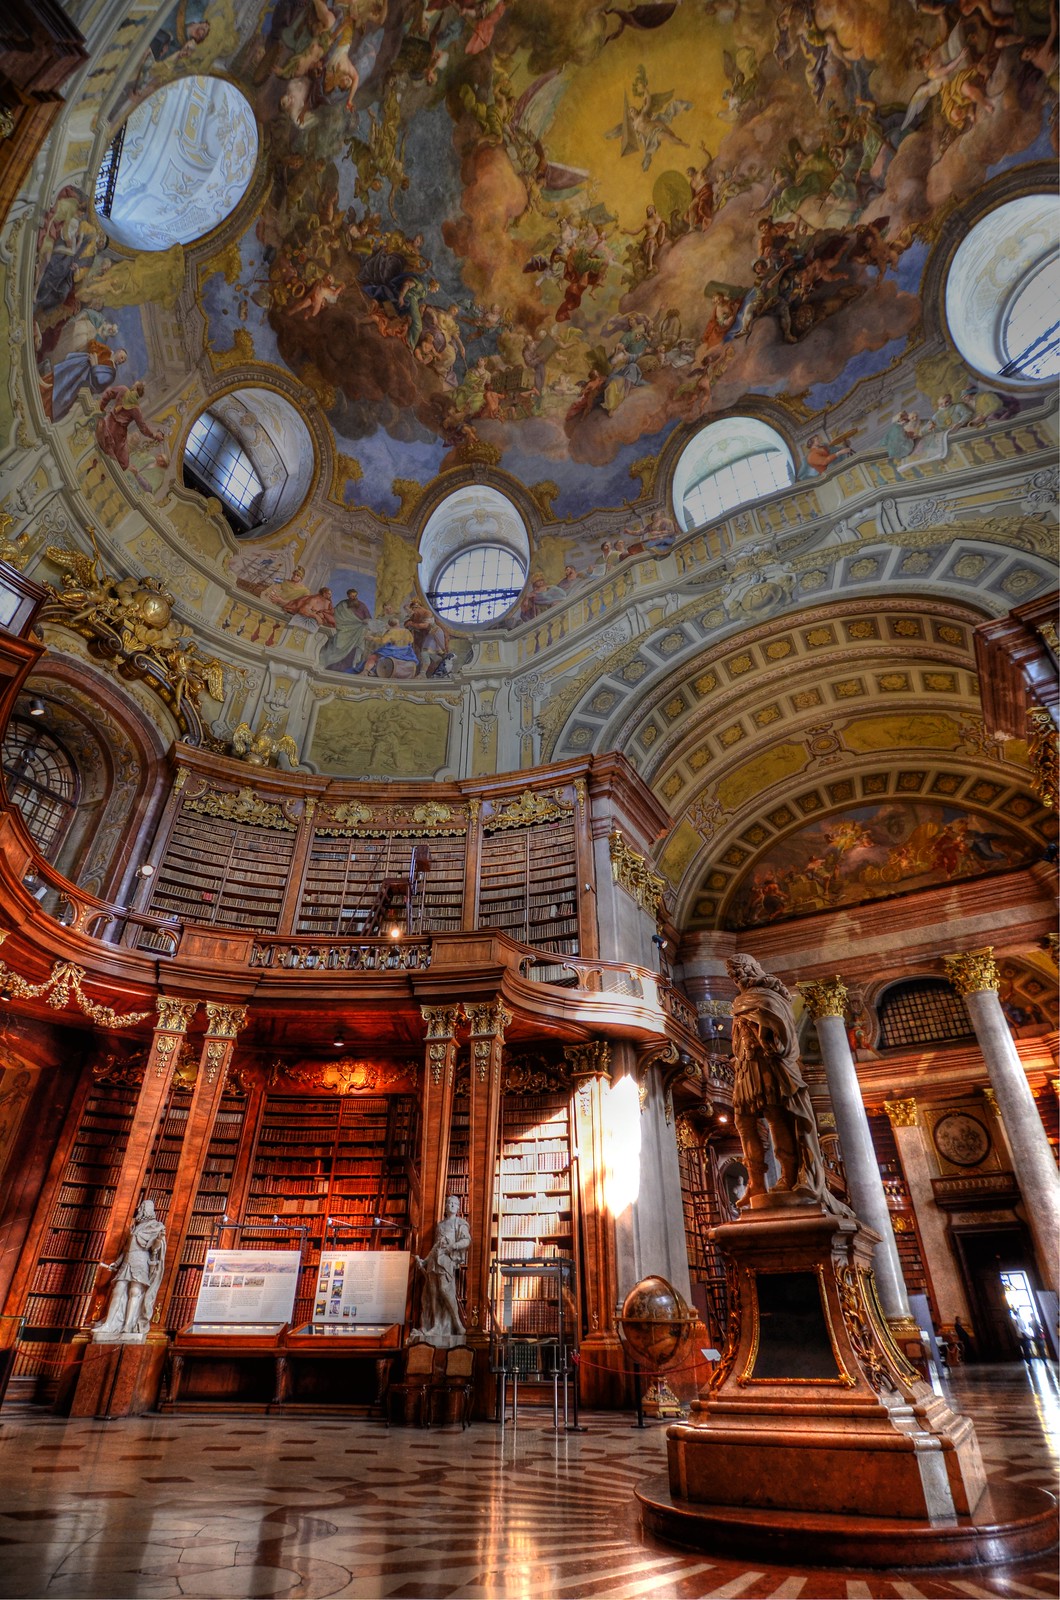 State Hall of the Austrian National Library, Austria. Image credit Richard Hopkins.